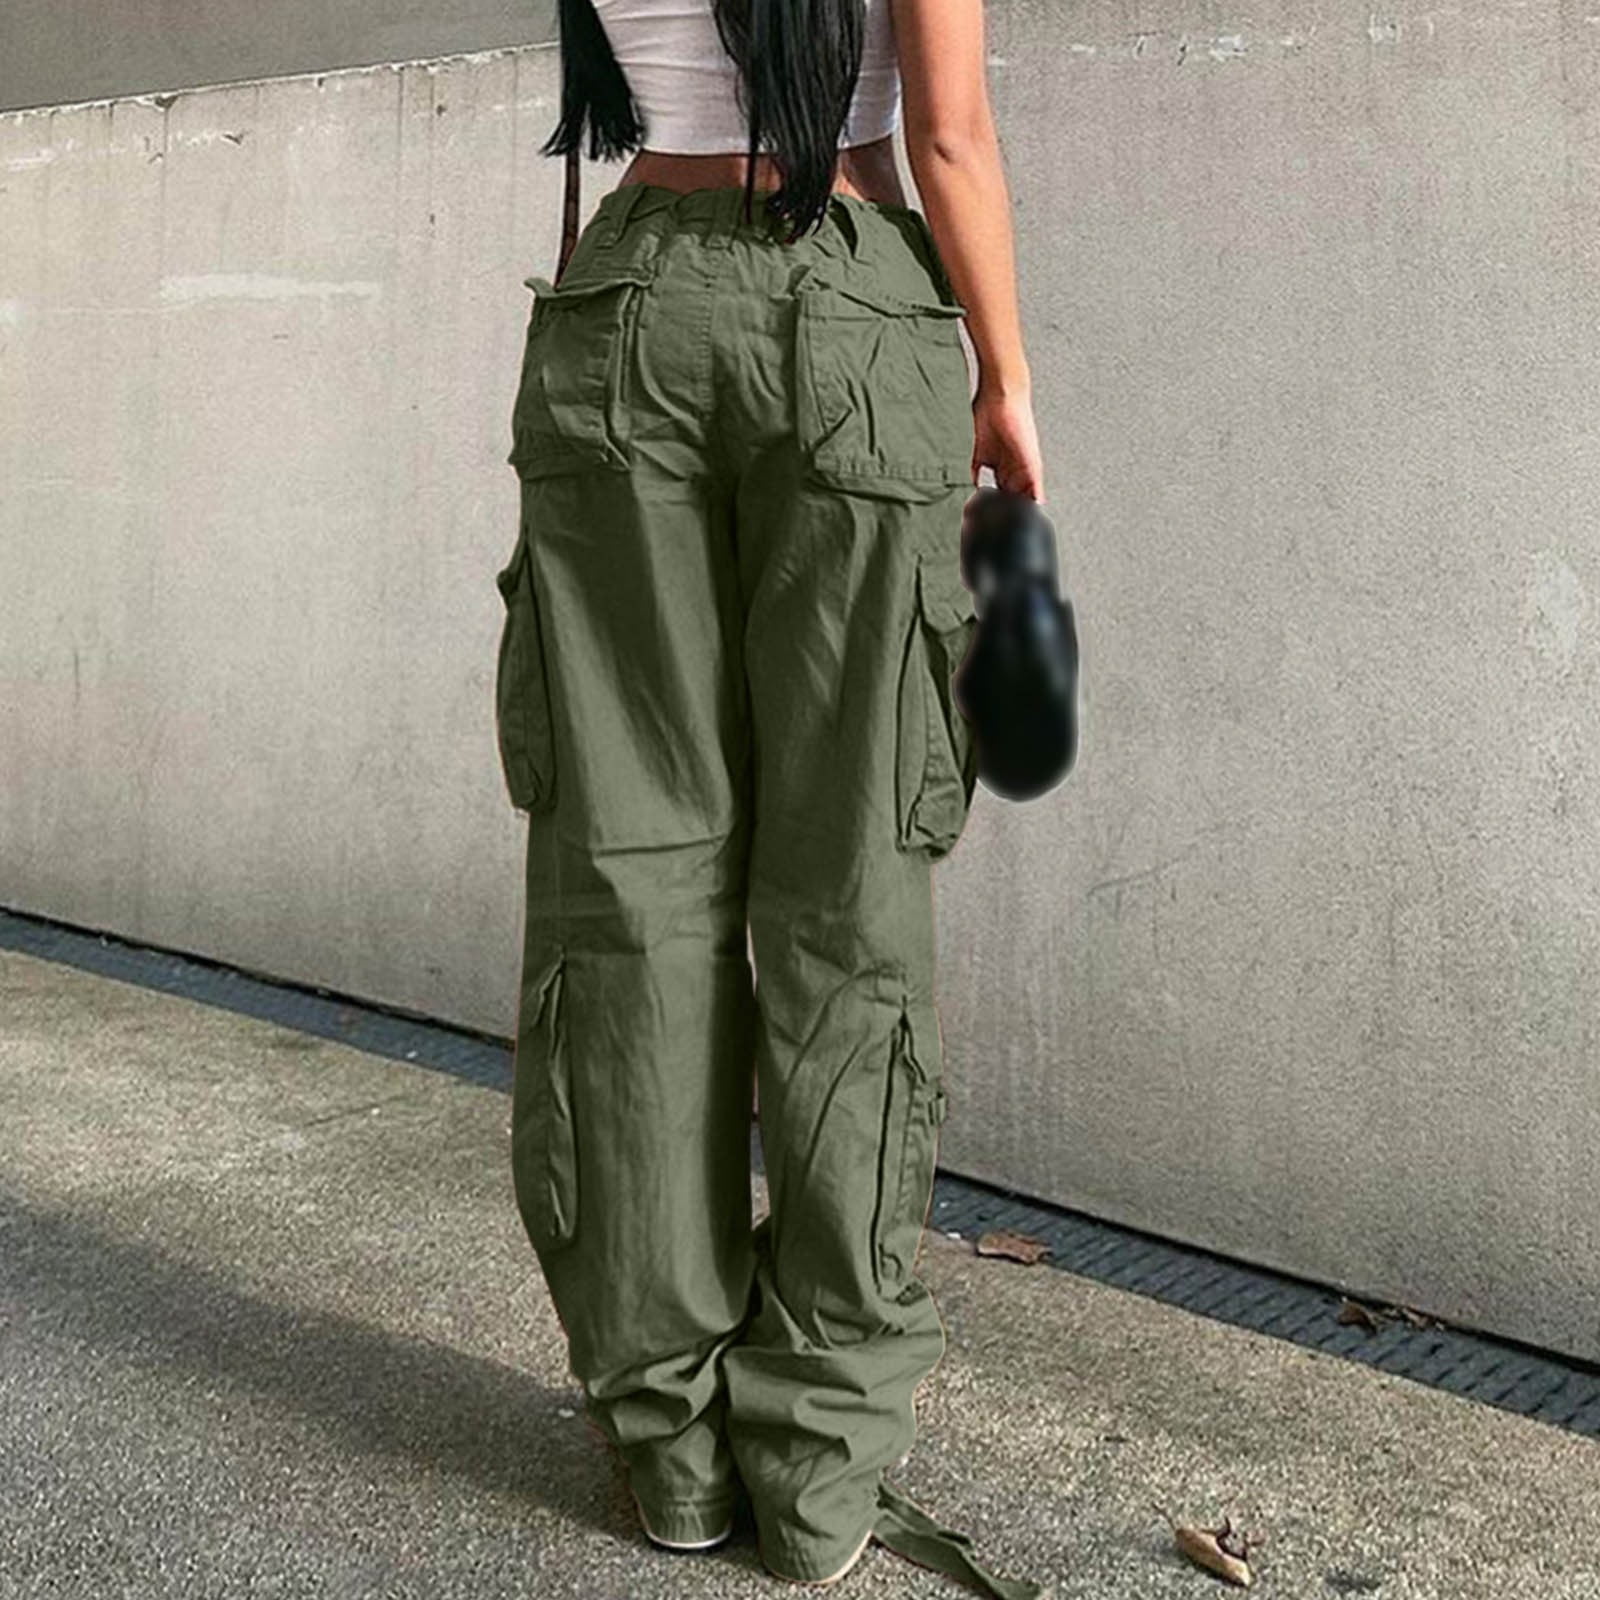  RCGYUTI Women High Waisted FP Cargo Pants Wide Leg Casual Pants  6 Pockets Combat Trousers (Black,S,Small,Regular,Regular) : Clothing, Shoes  & Jewelry